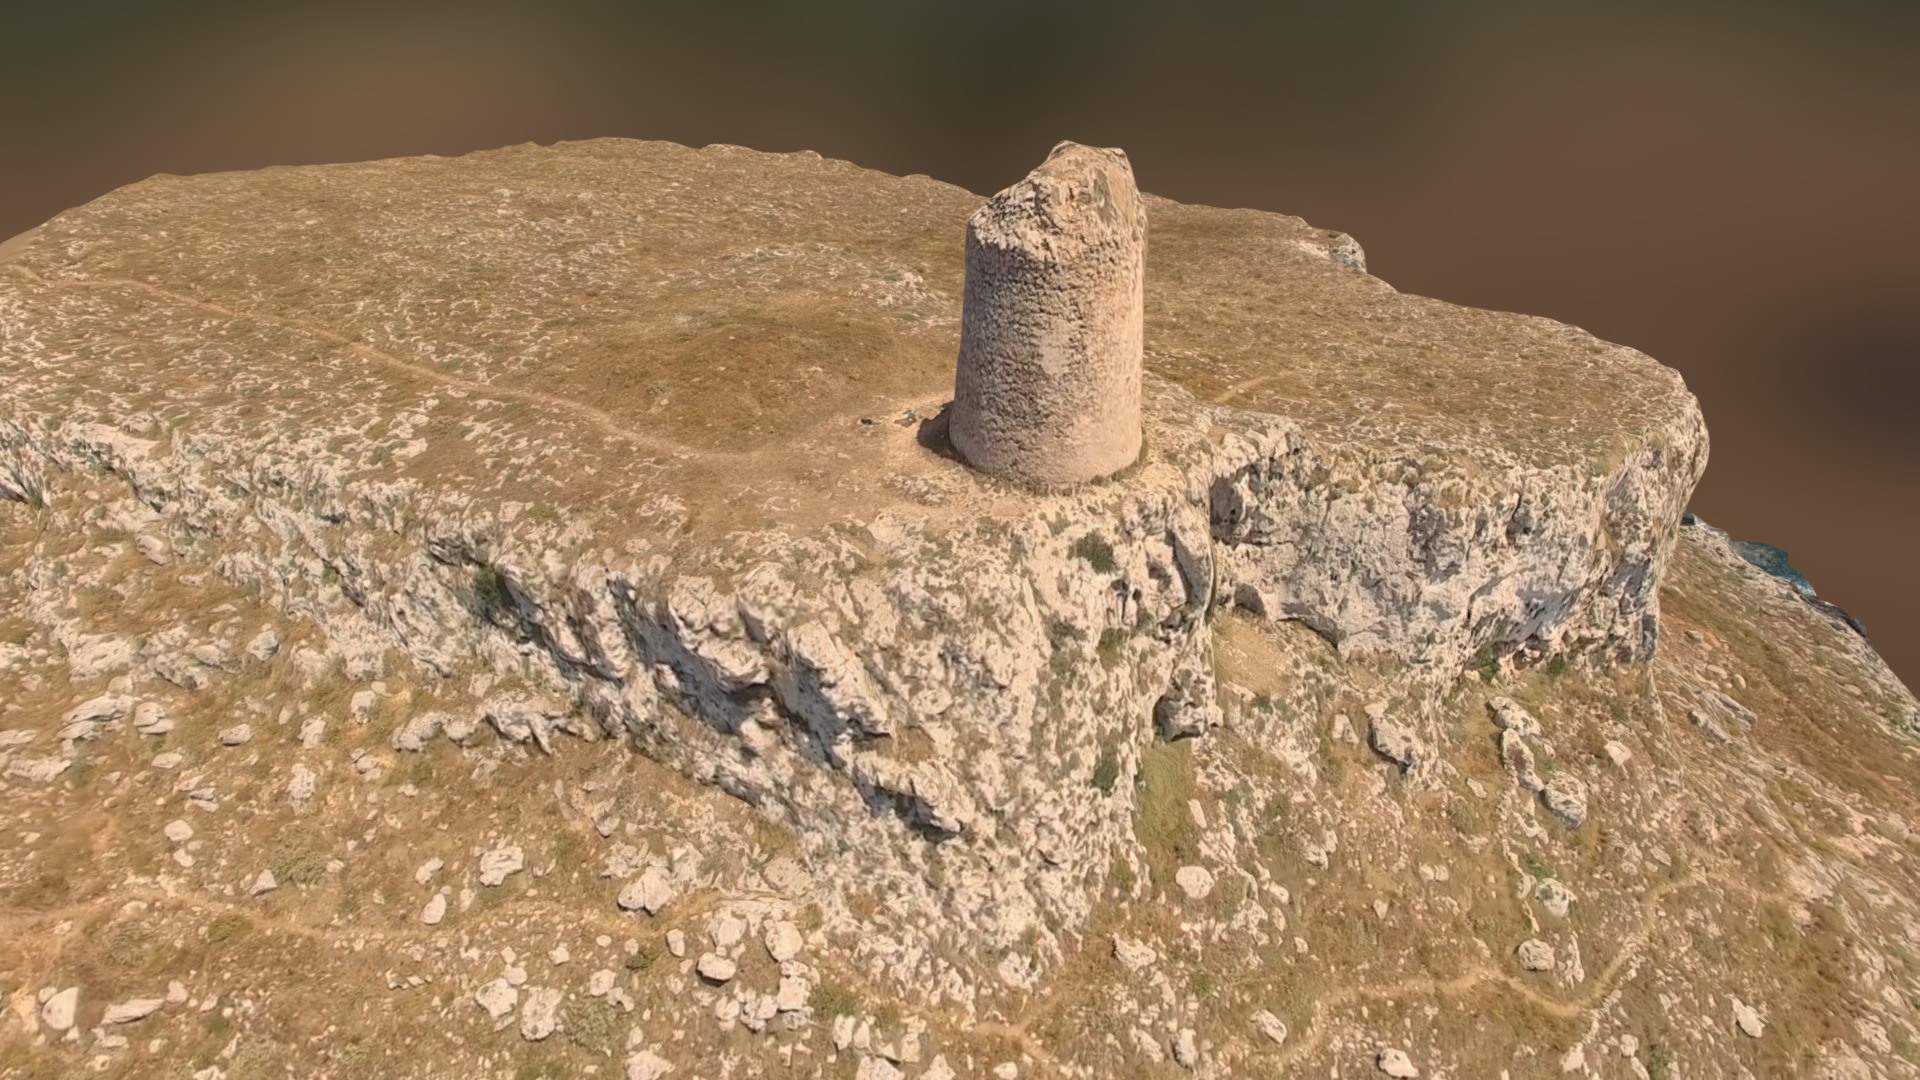 3D model Landscape. M2. Free. - This is a 3D model of the Landscape. M2. Free.. The 3D model is about a rock with a hole in it.